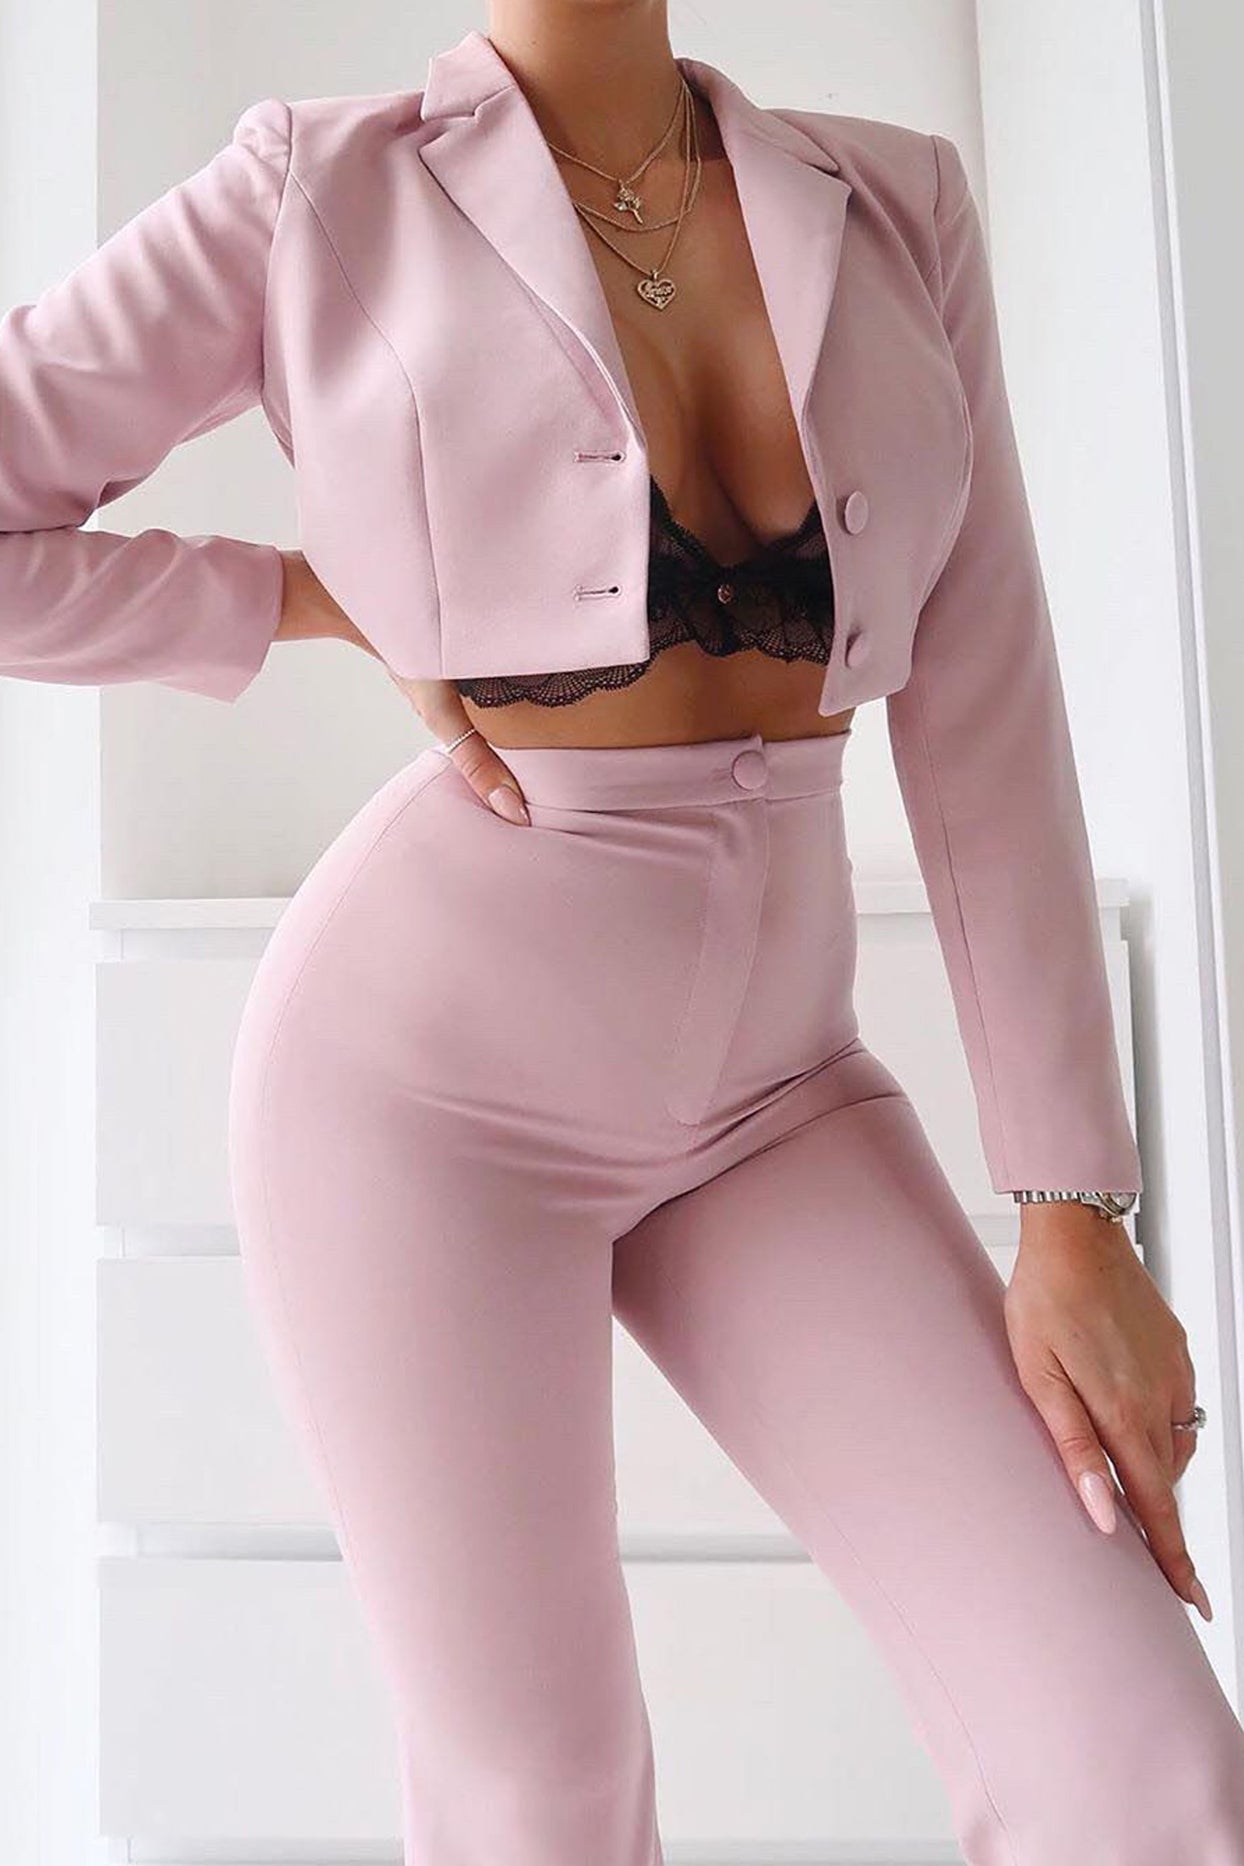 Try Harder Cropped Blazer in Mauve